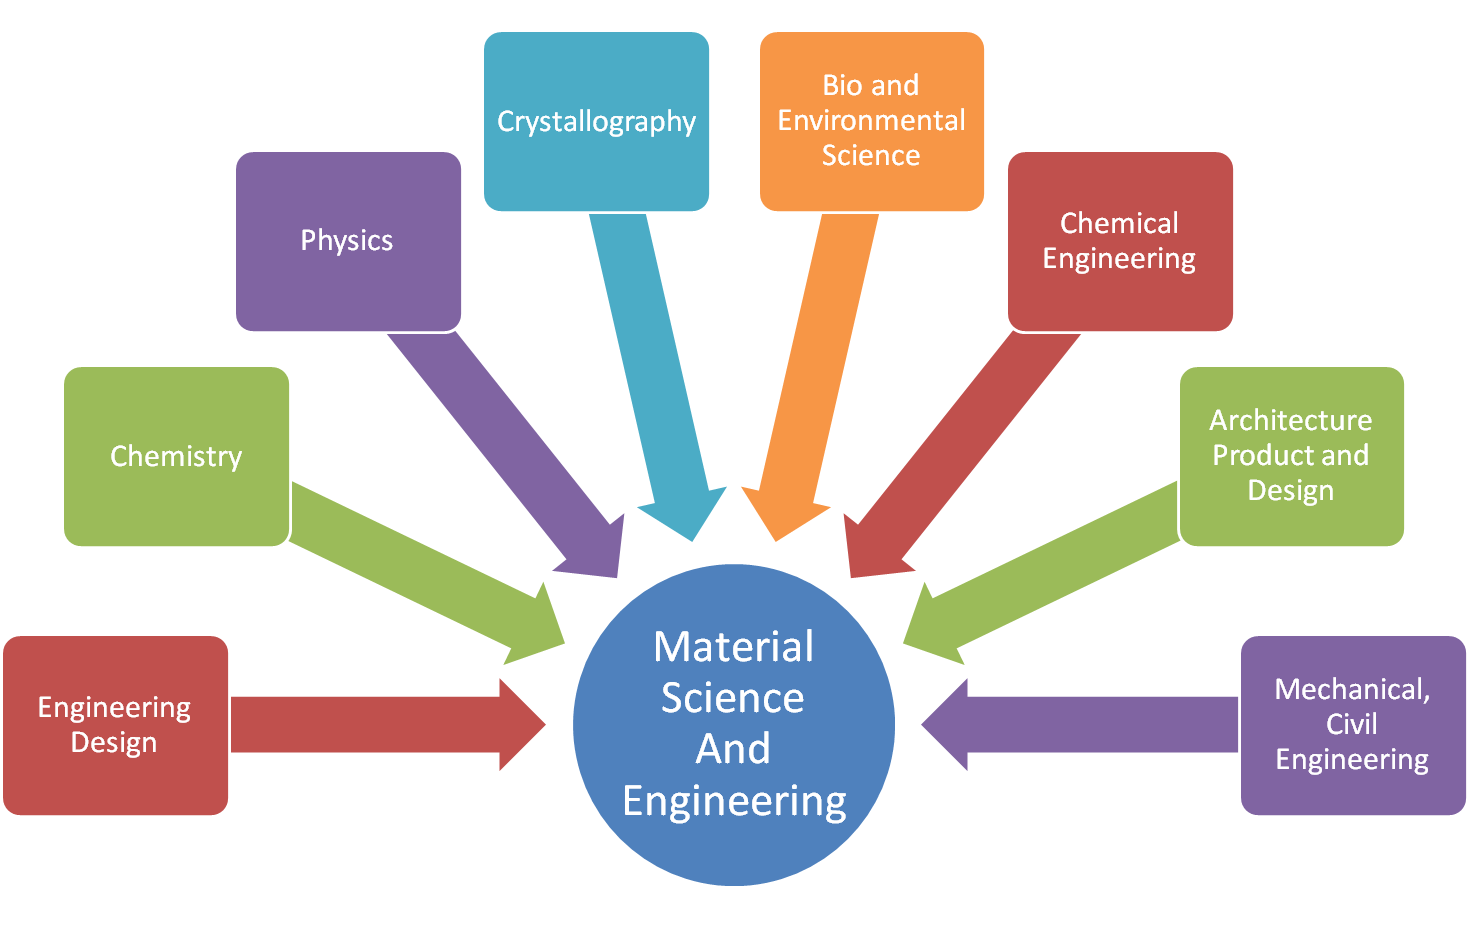 new research topics in materials science